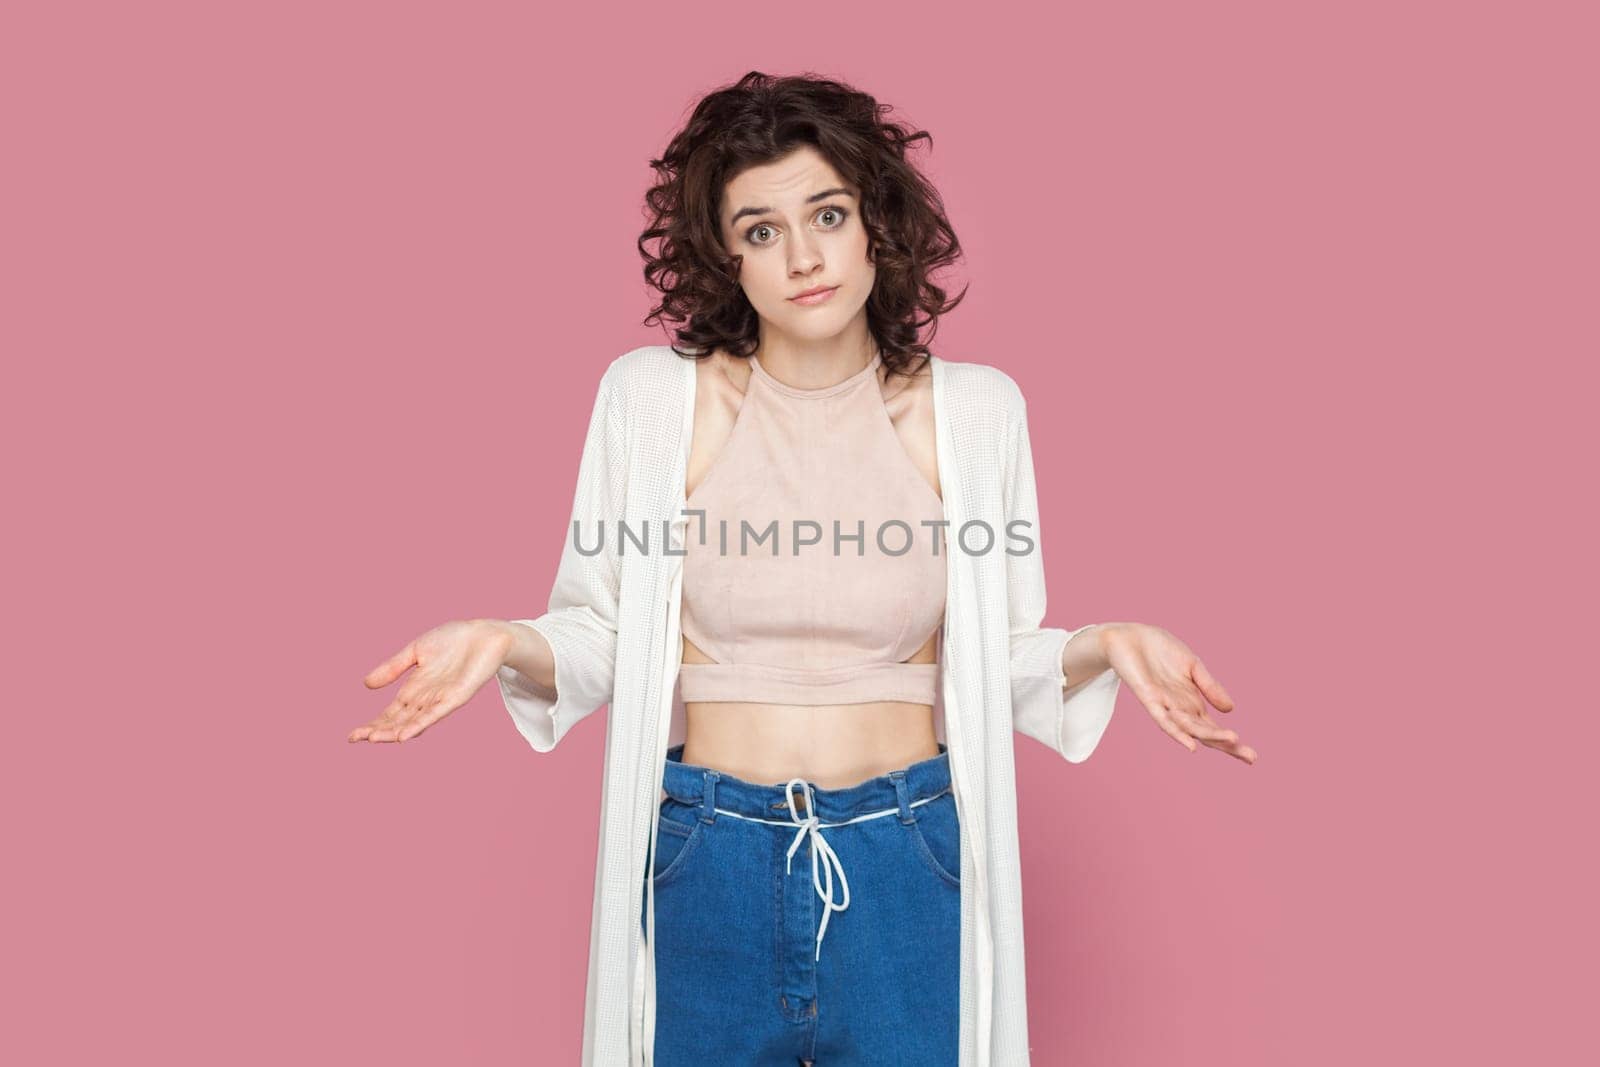 Portrait of puzzled uncertain woman with curly hairstyle wearing casual style outfit spreads hands aside, doesn't know answer. Indoor studio shot isolated on pink background.